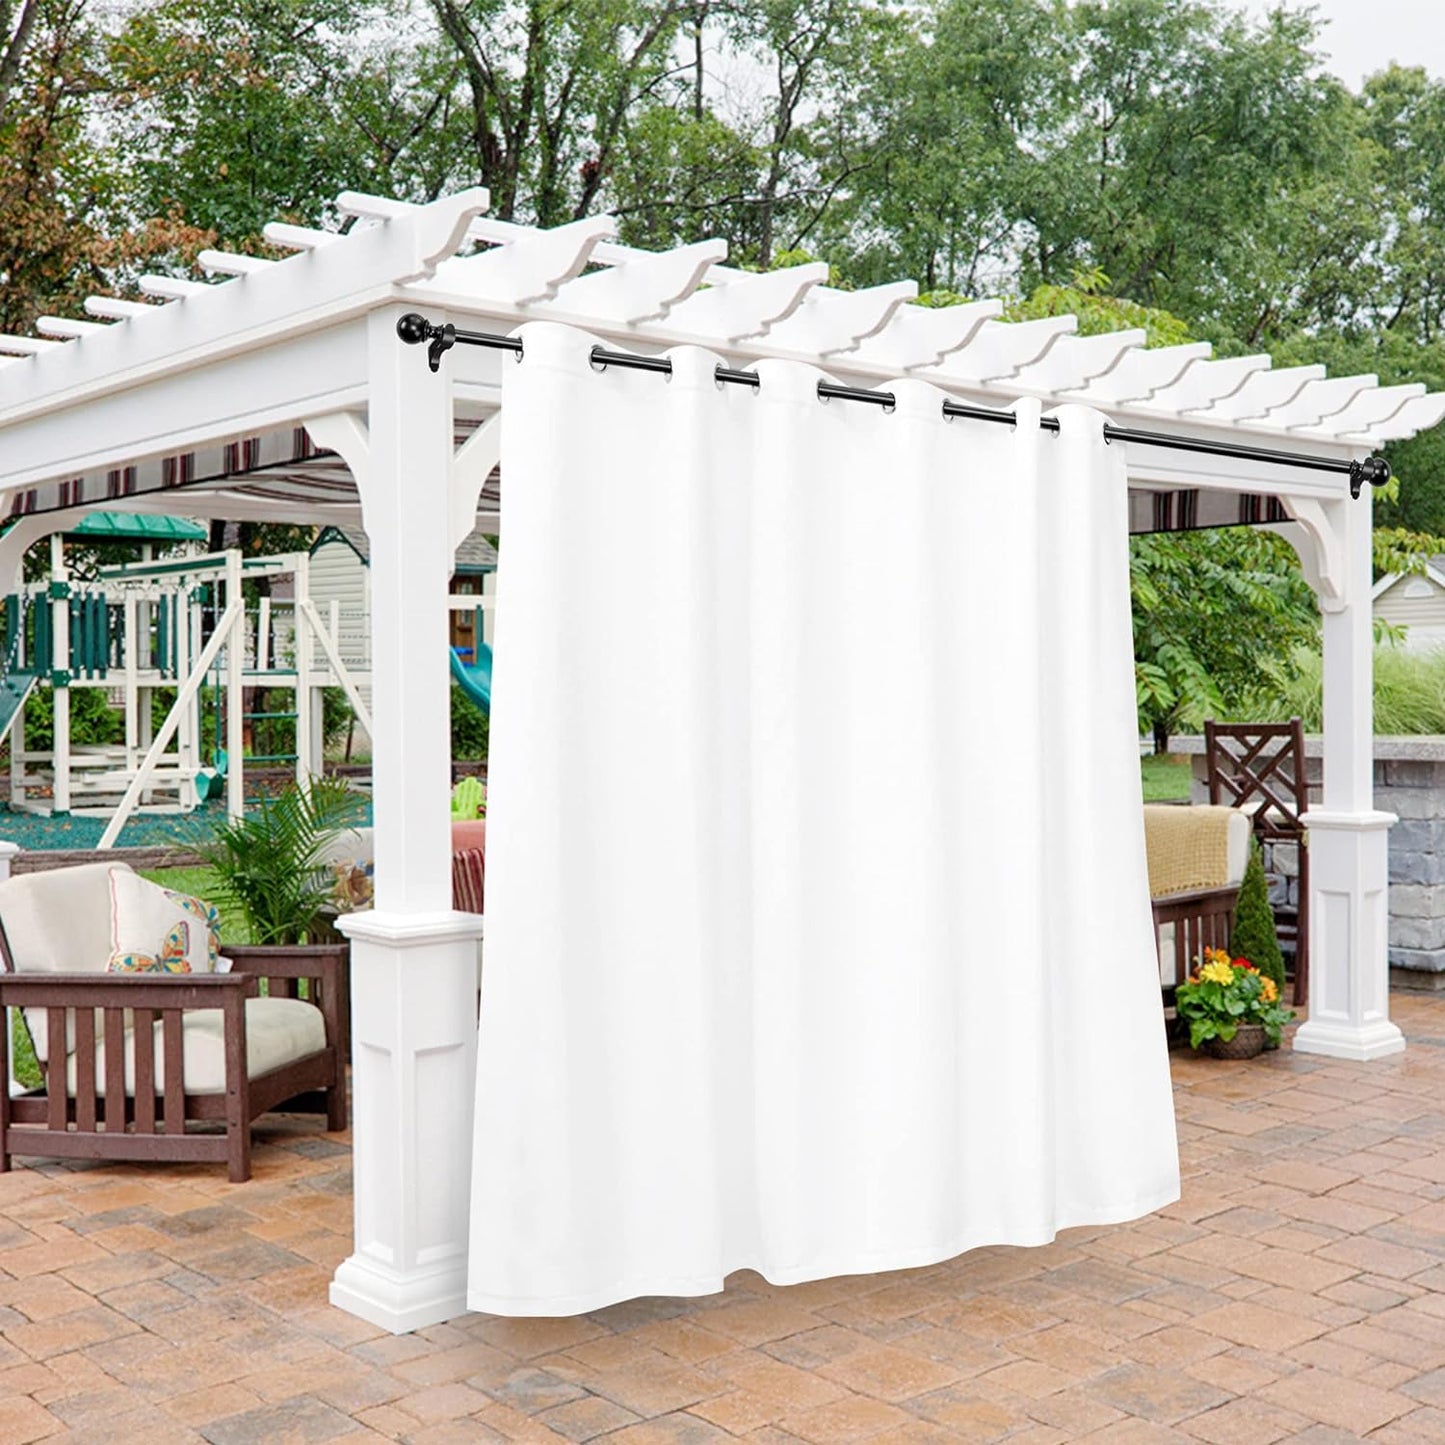 BONZER Outdoor Curtains for Patio Waterproof - Light Blocking Weather Resistant Privacy Grommet Blackout Curtains for Gazebo, Porch, Pergola, Cabana, Deck, Sunroom, 1 Panel, 52W X 84L Inch, Silver  BONZER White 100W X 120 Inch 